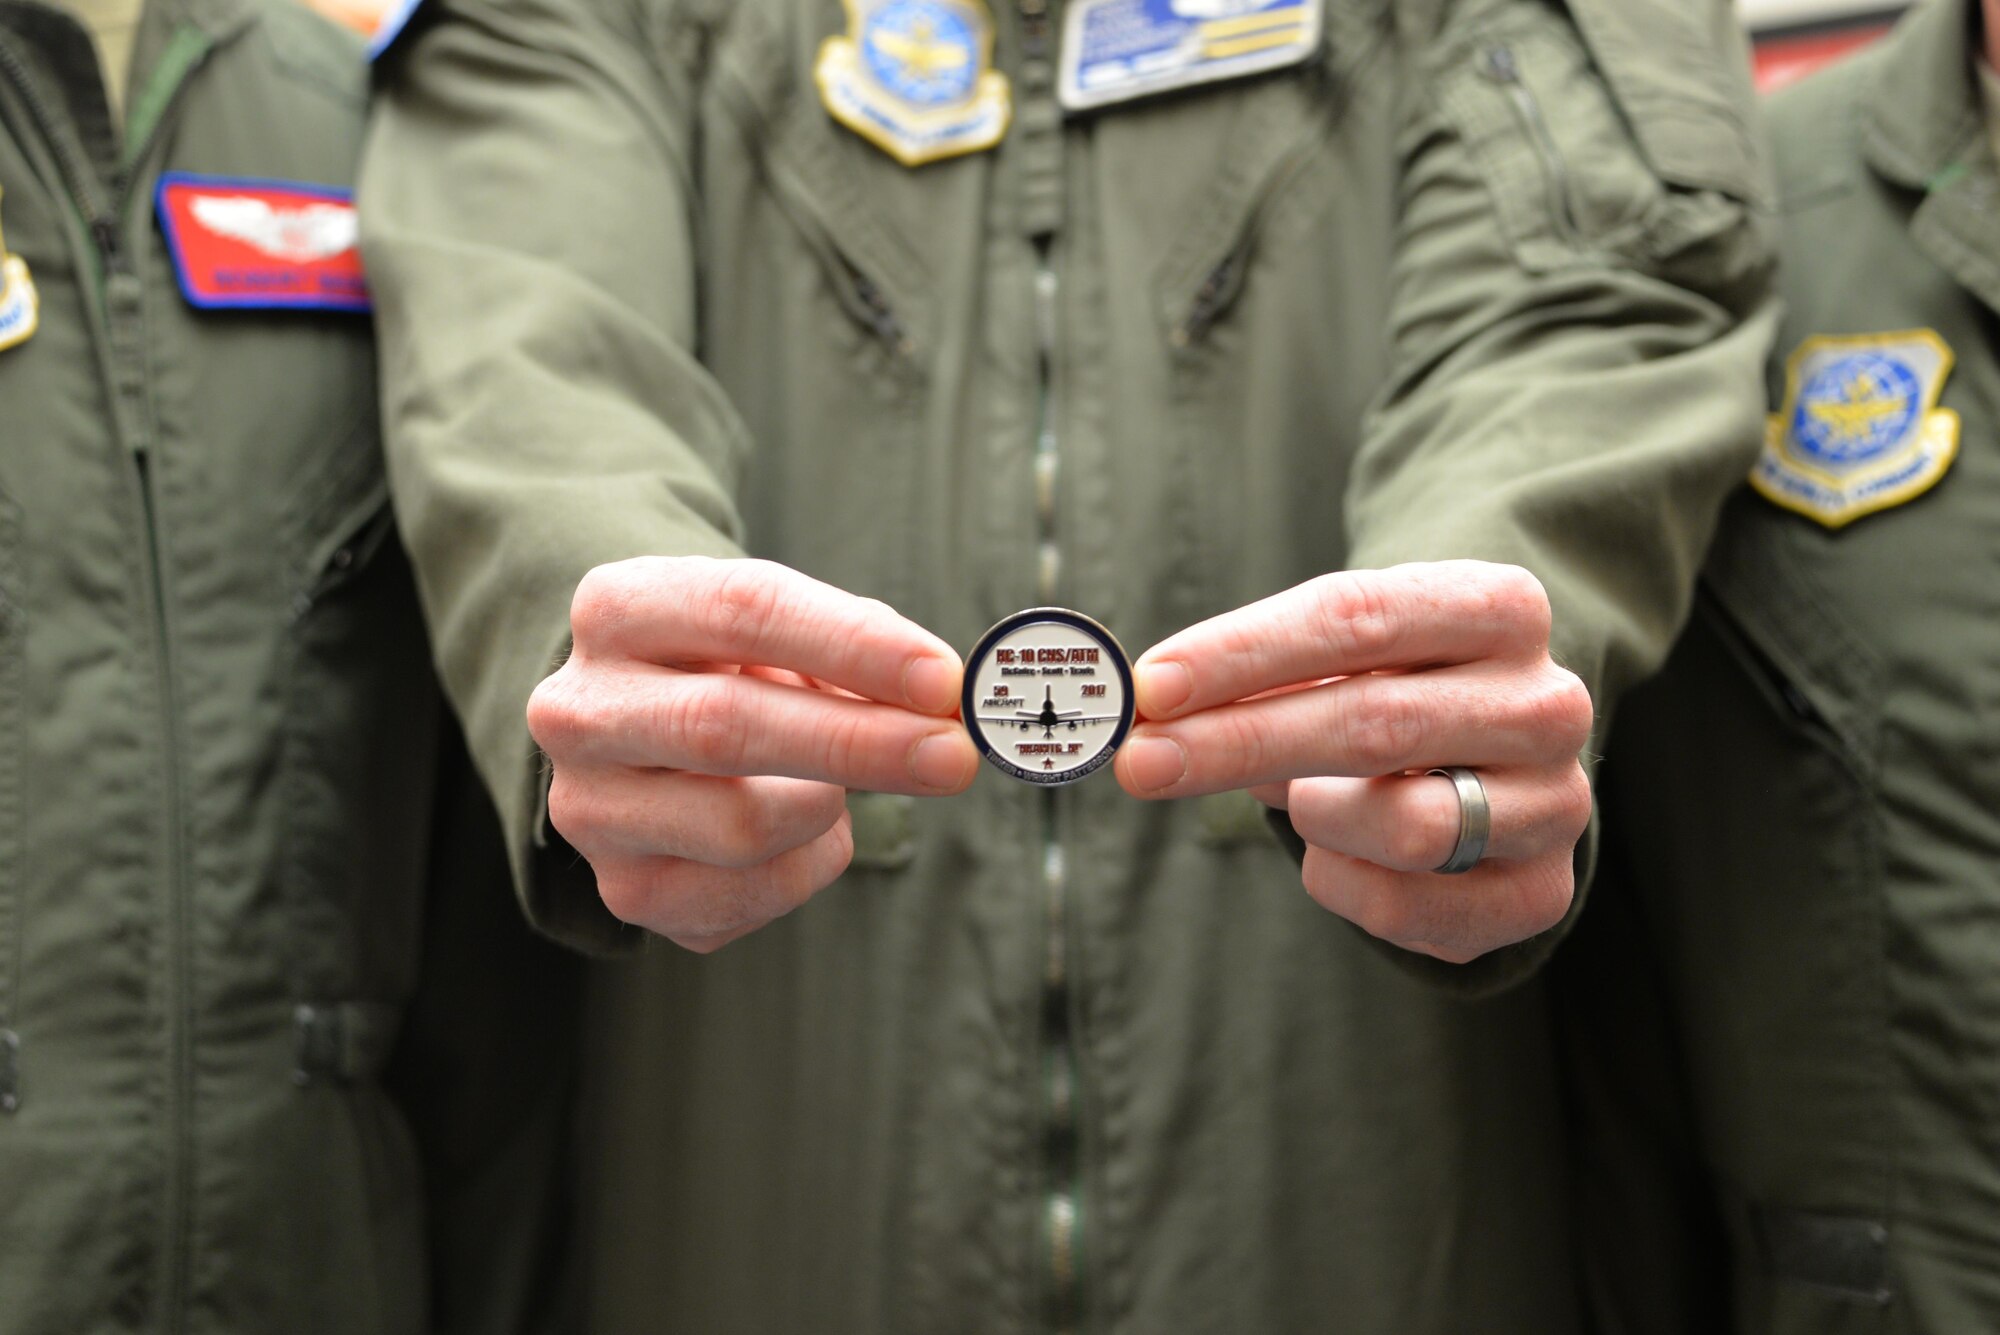 The aircrew who completed the final KC-10 Extender modification flight displays the coin they received to signify the completion of the project April 5 at Travis Air Force Base, California. The 59th and final KC-10 was modified and flown home by the 9th and 6th Air Refueling Squadrons at Travis March 28. (U.S. Air Force photo / 2nd Lt. Sarah Johnson)

